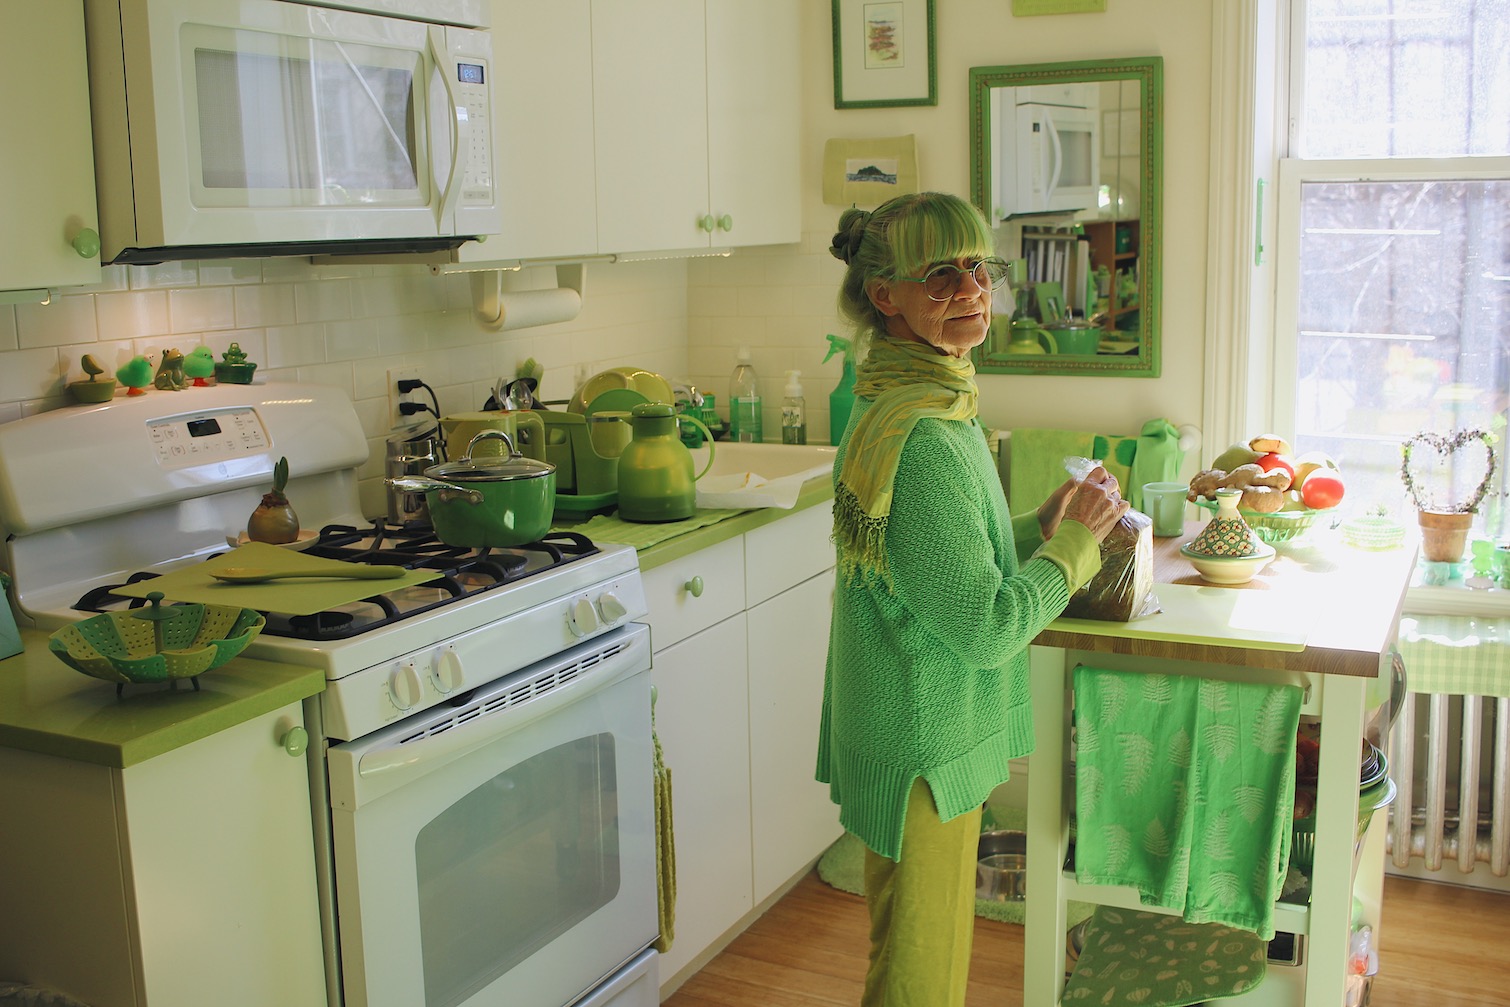 The Green Lady's kitchen